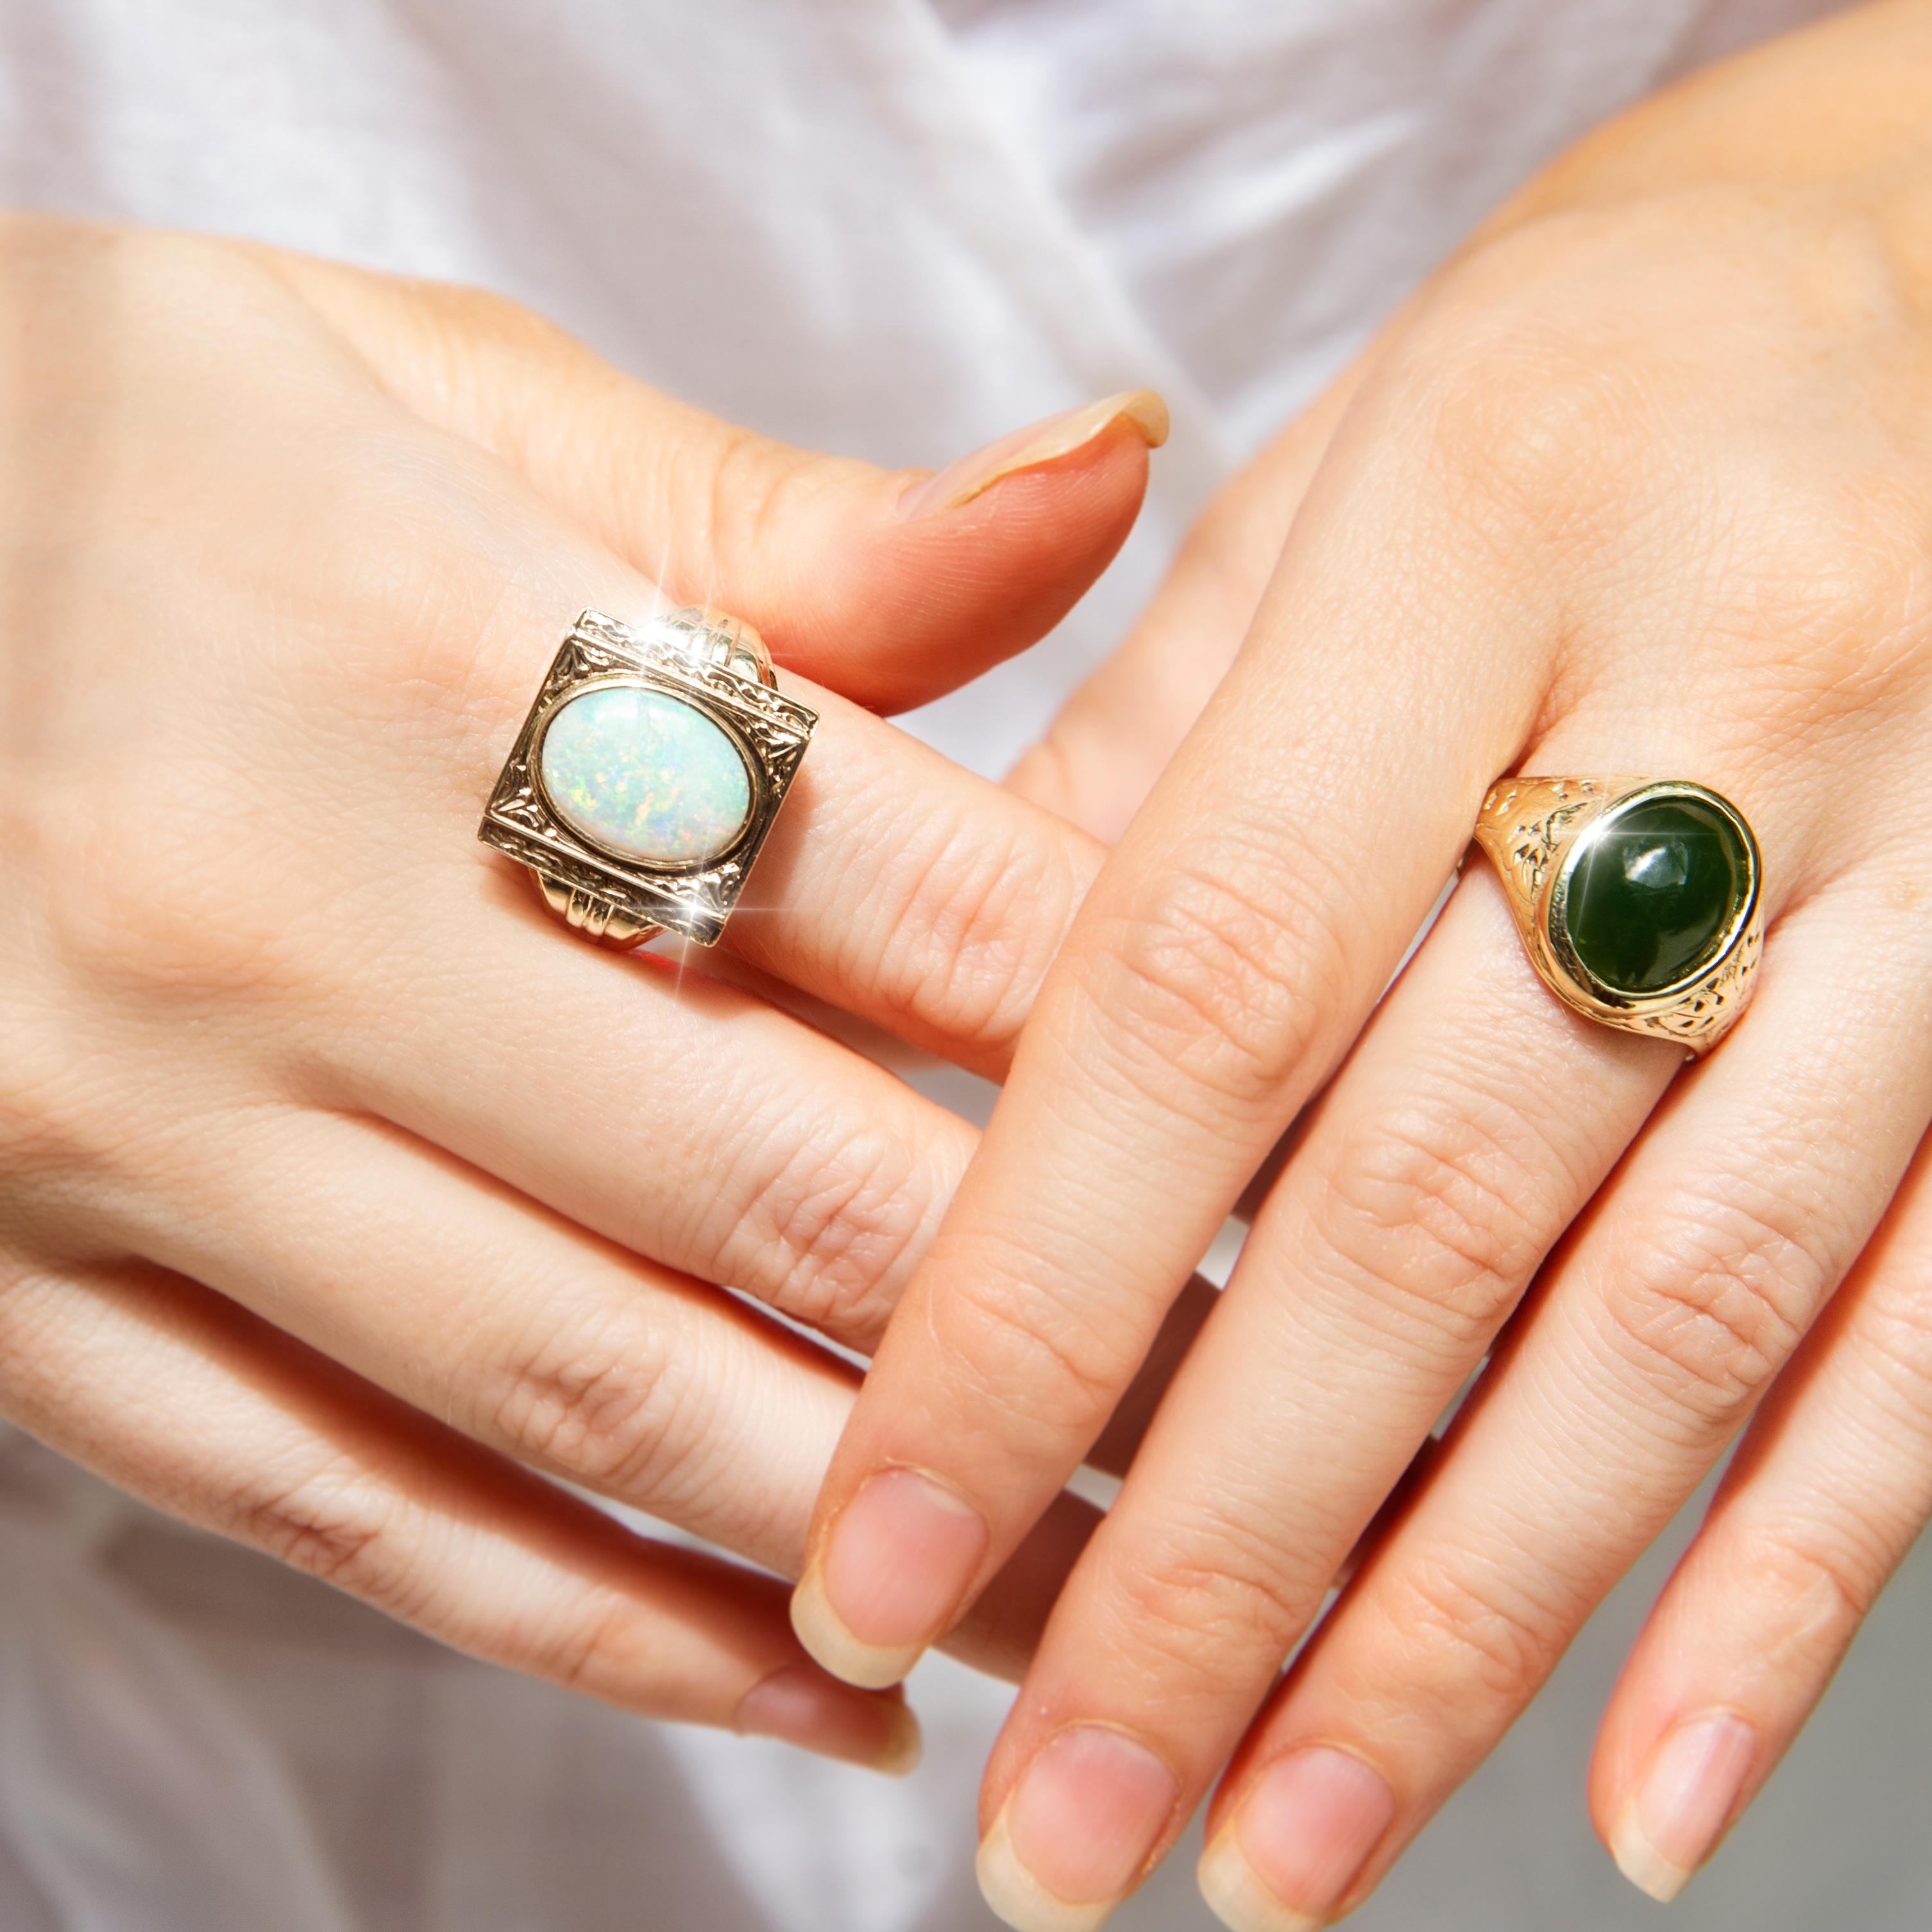 Forged in 14 carat yellow gold, this gorgeous vintage ring, circa 1980s, features an opulent deep green Nephrite jade cabochon set on patterned domed shoulders. This lovely adornment has been named The Logan Ring. She is a graceful everyday ring